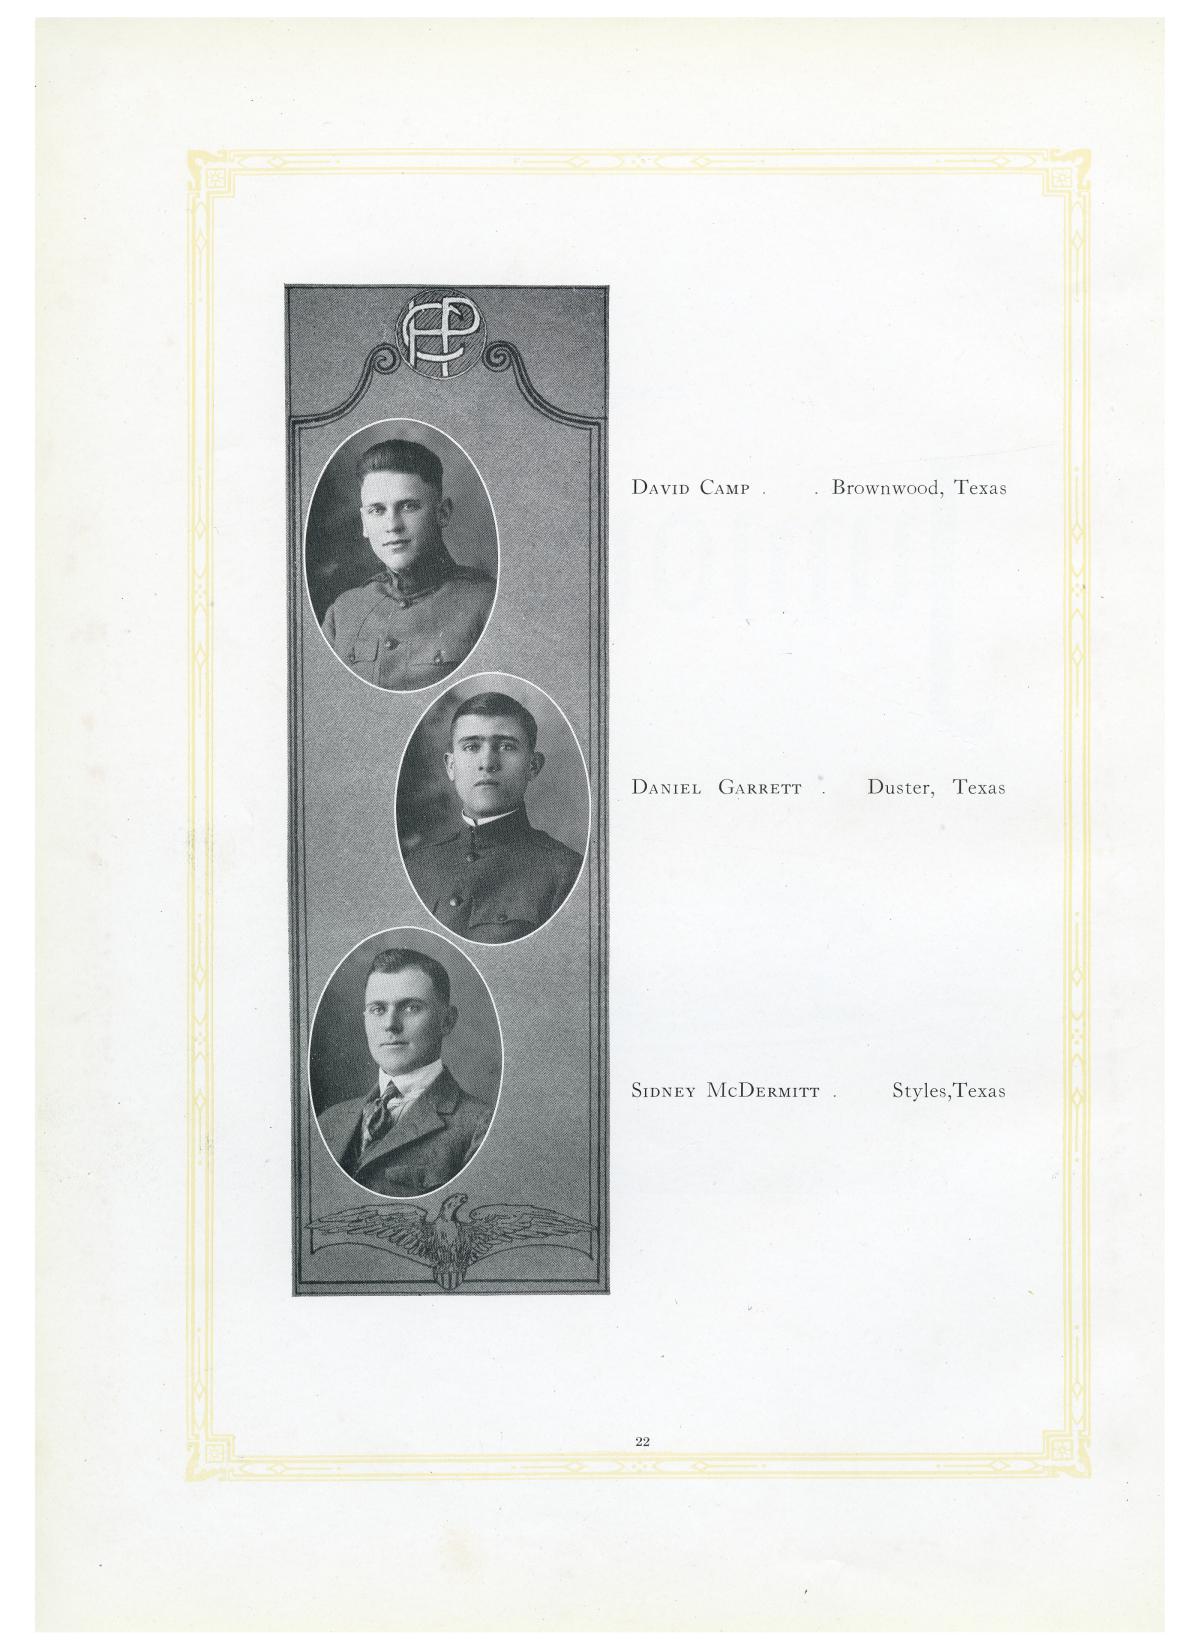 The Lasso, Yearbook of Howard Payne College, 1919
                                                
                                                    22
                                                